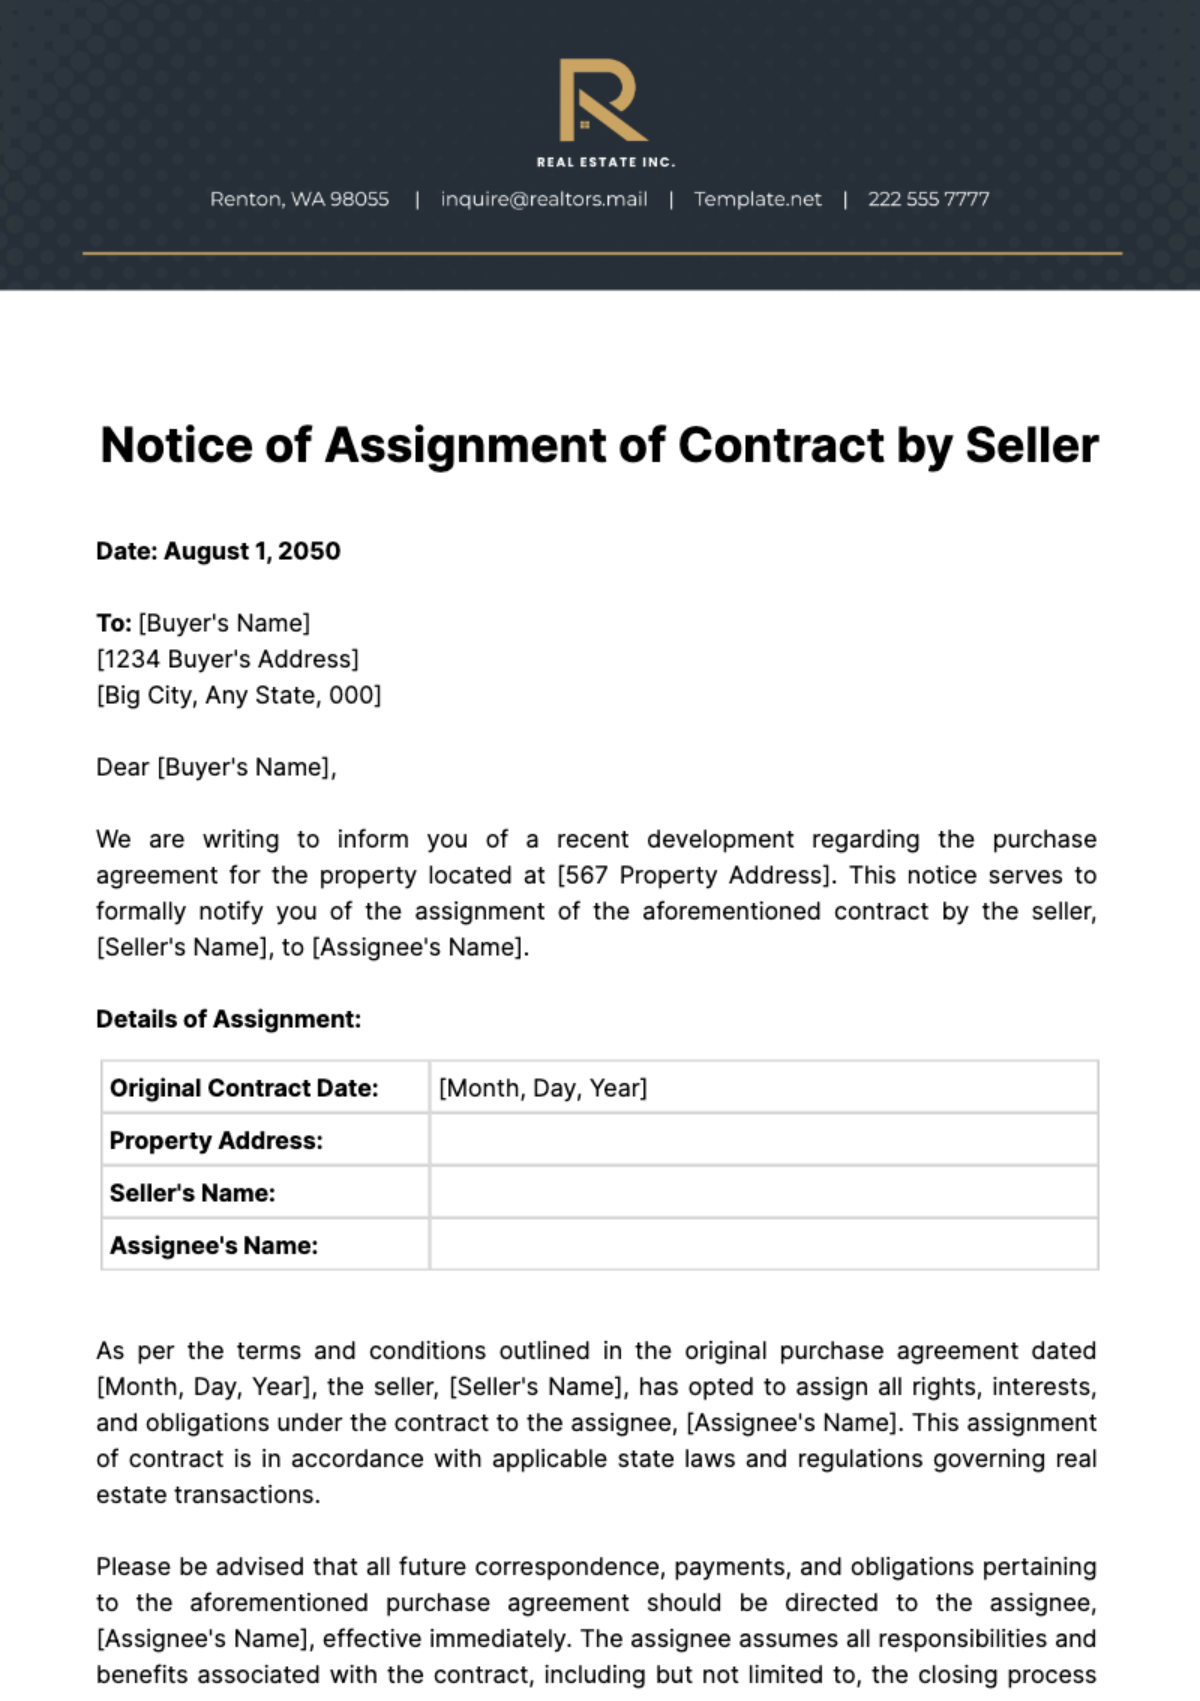 Free Real Estate Notice of Assignment of Contract by Seller Template